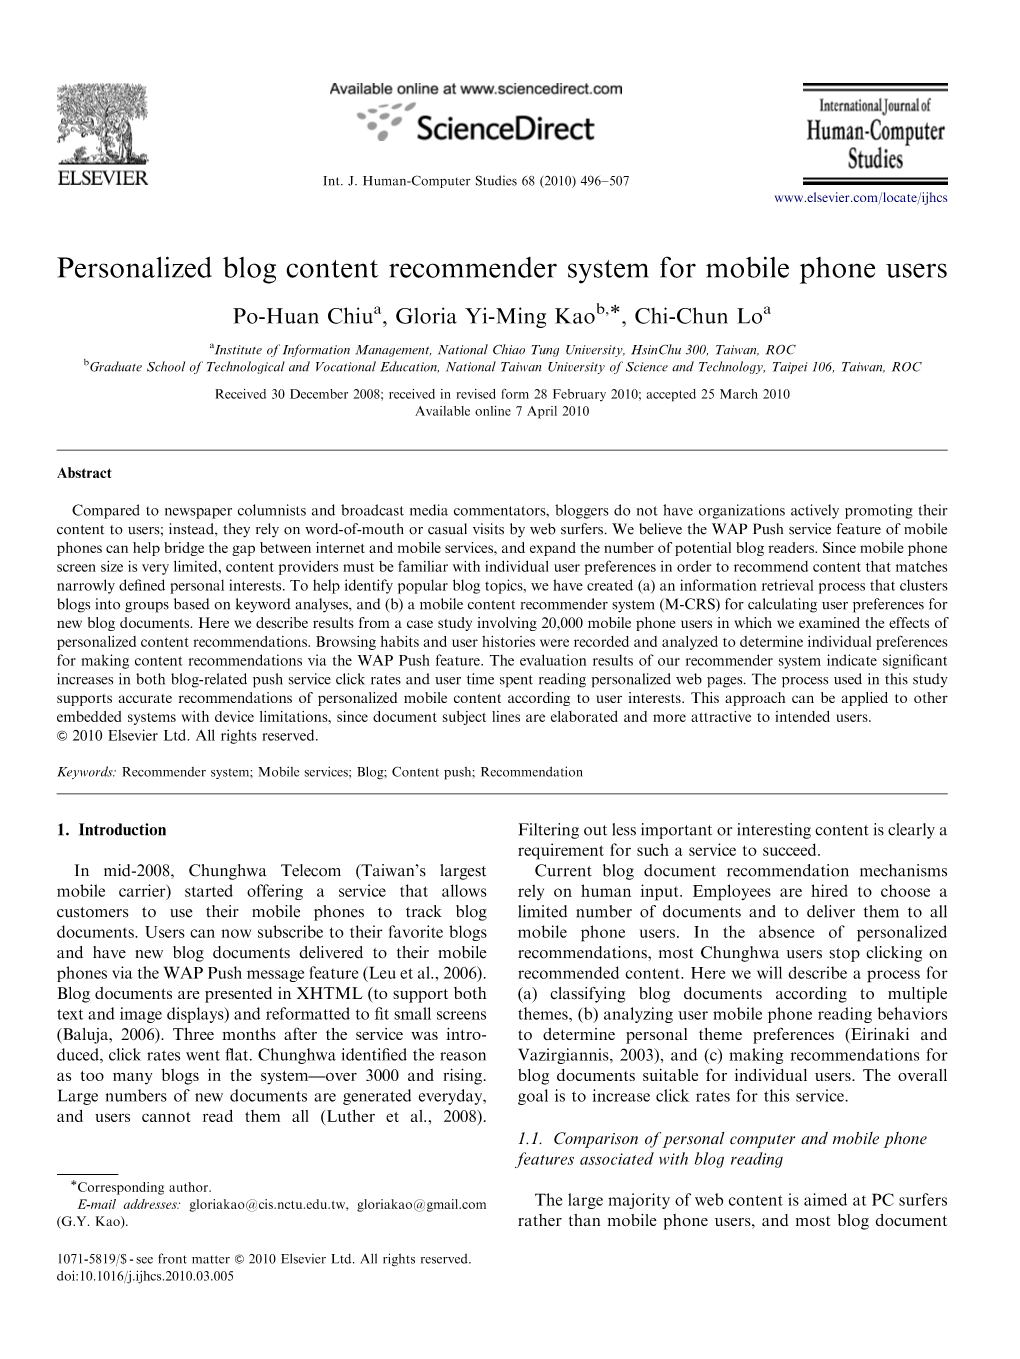 Personalized Blog Content Recommender System for Mobile Phone Users